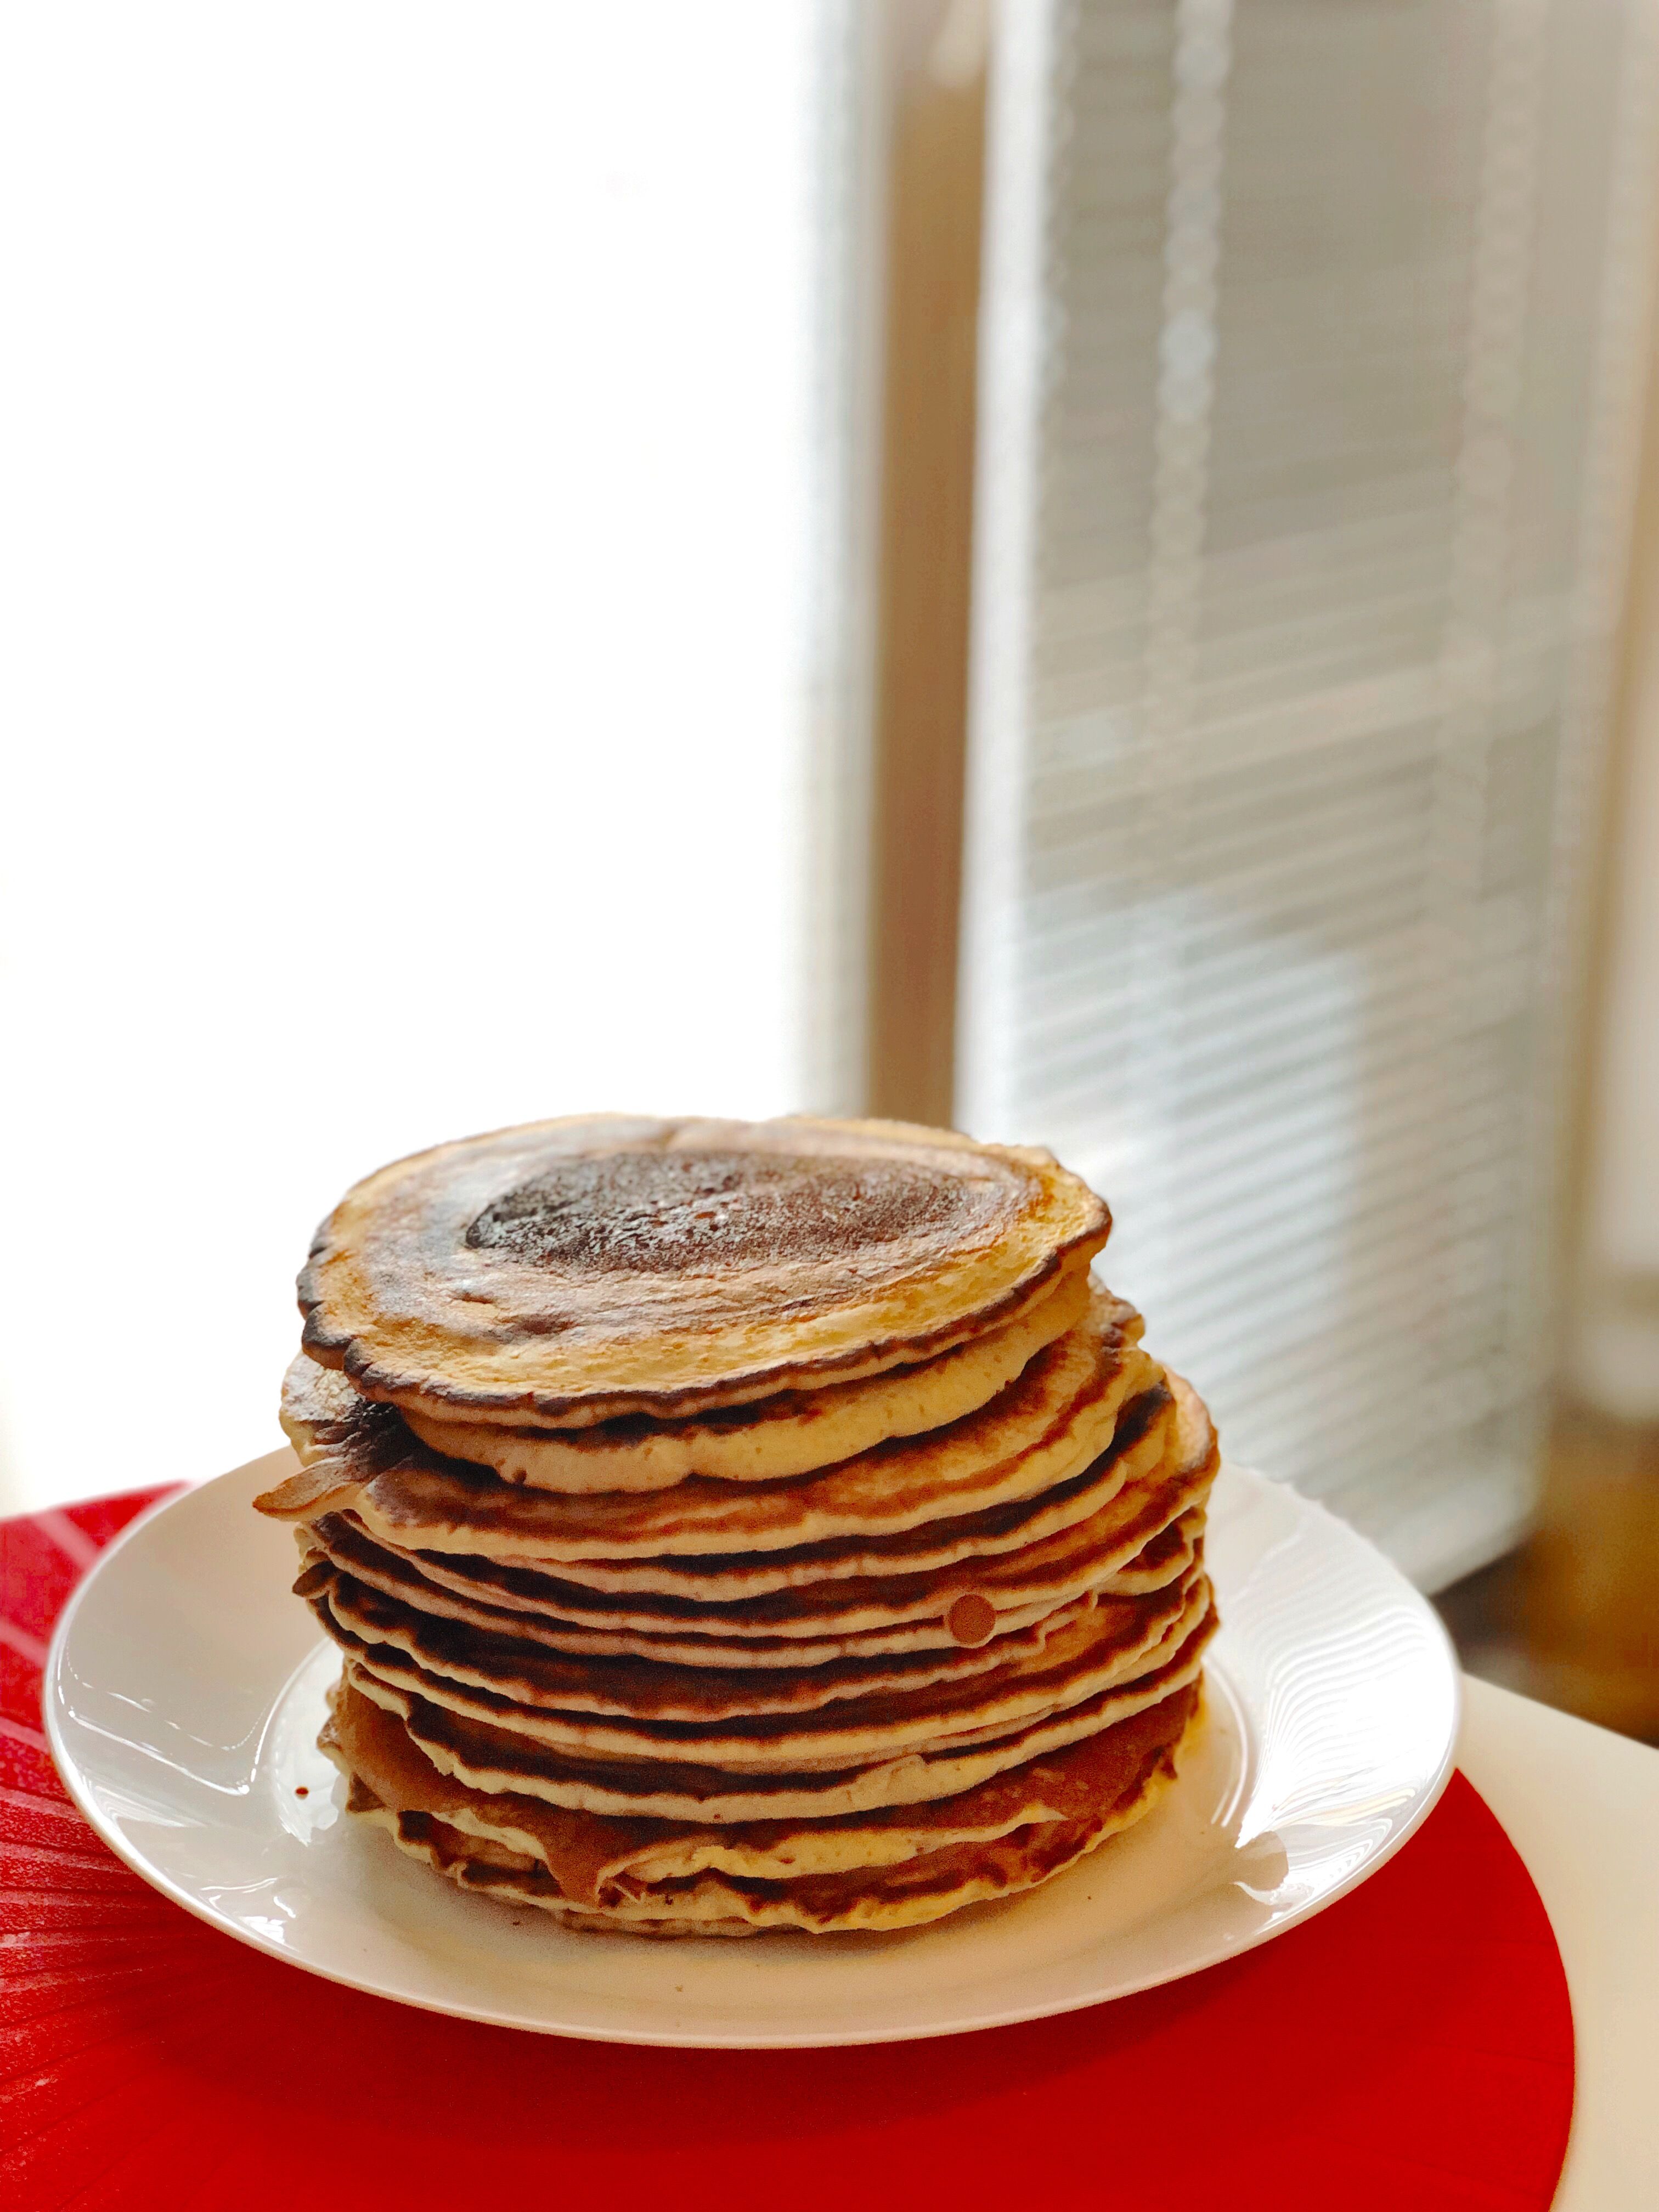 Caption: A photo of American pancakes piled on top of each other  on a plate.